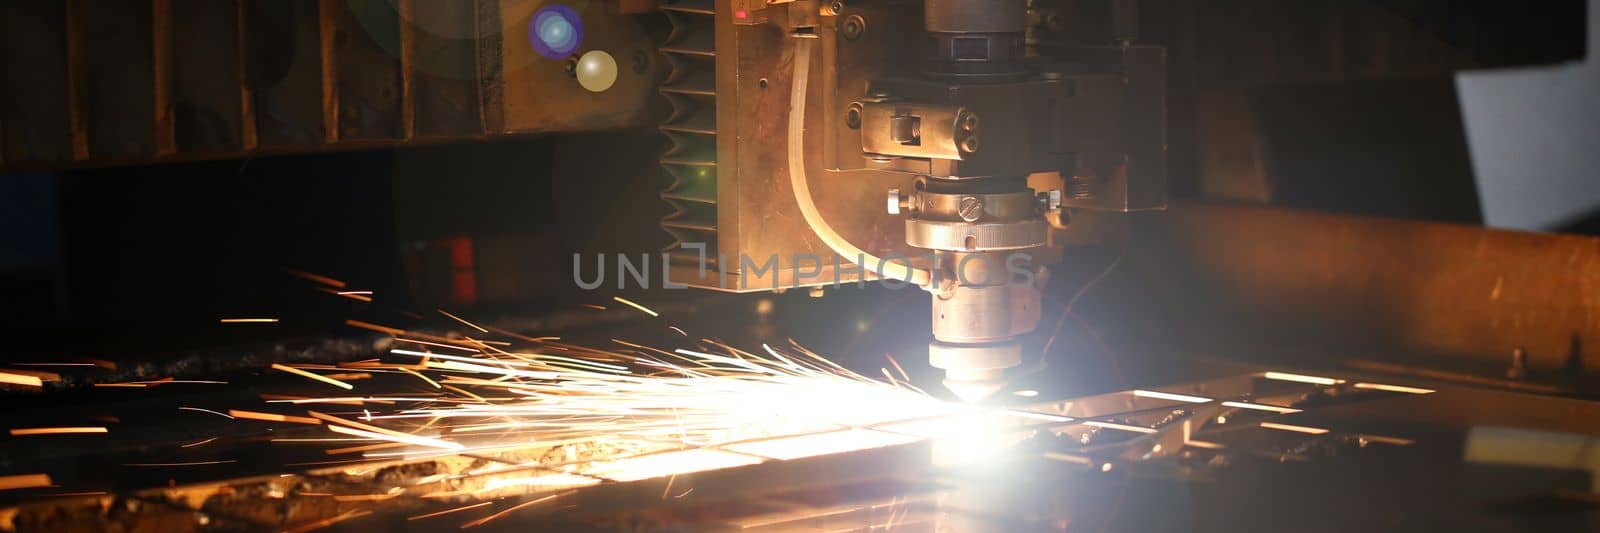 CNC Laser cutting of metal and modern industrial technologies by kuprevich